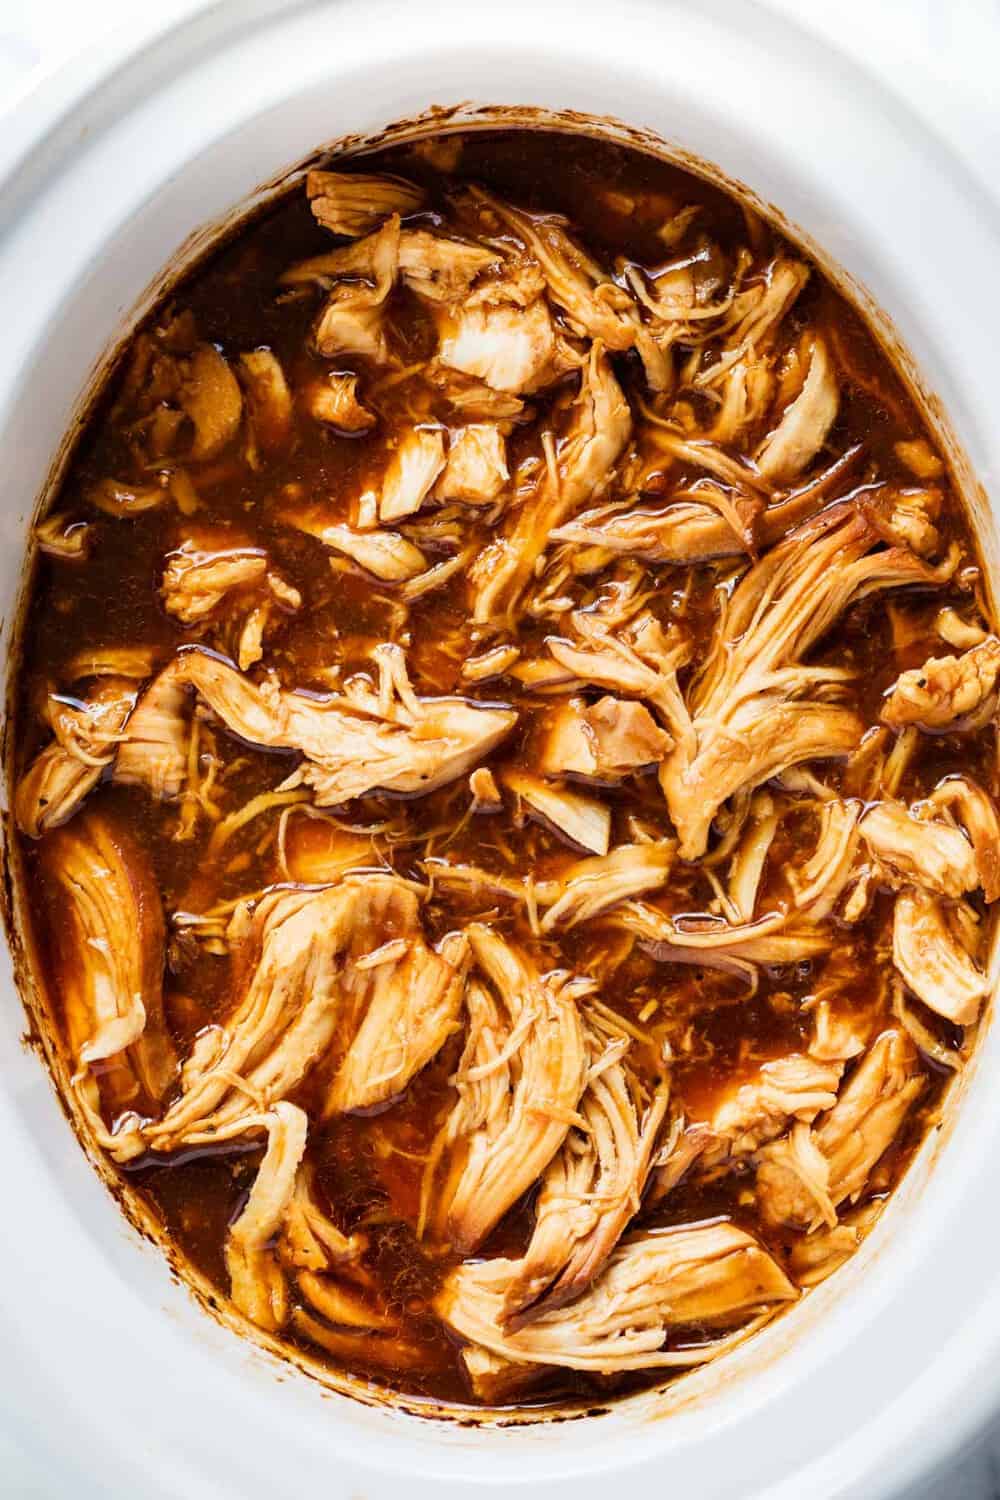 3 Ingredient Crockpot Bbq Chicken 5 Min Prep I Heart Naptime,Smoked Sausage Recipes With Pasta